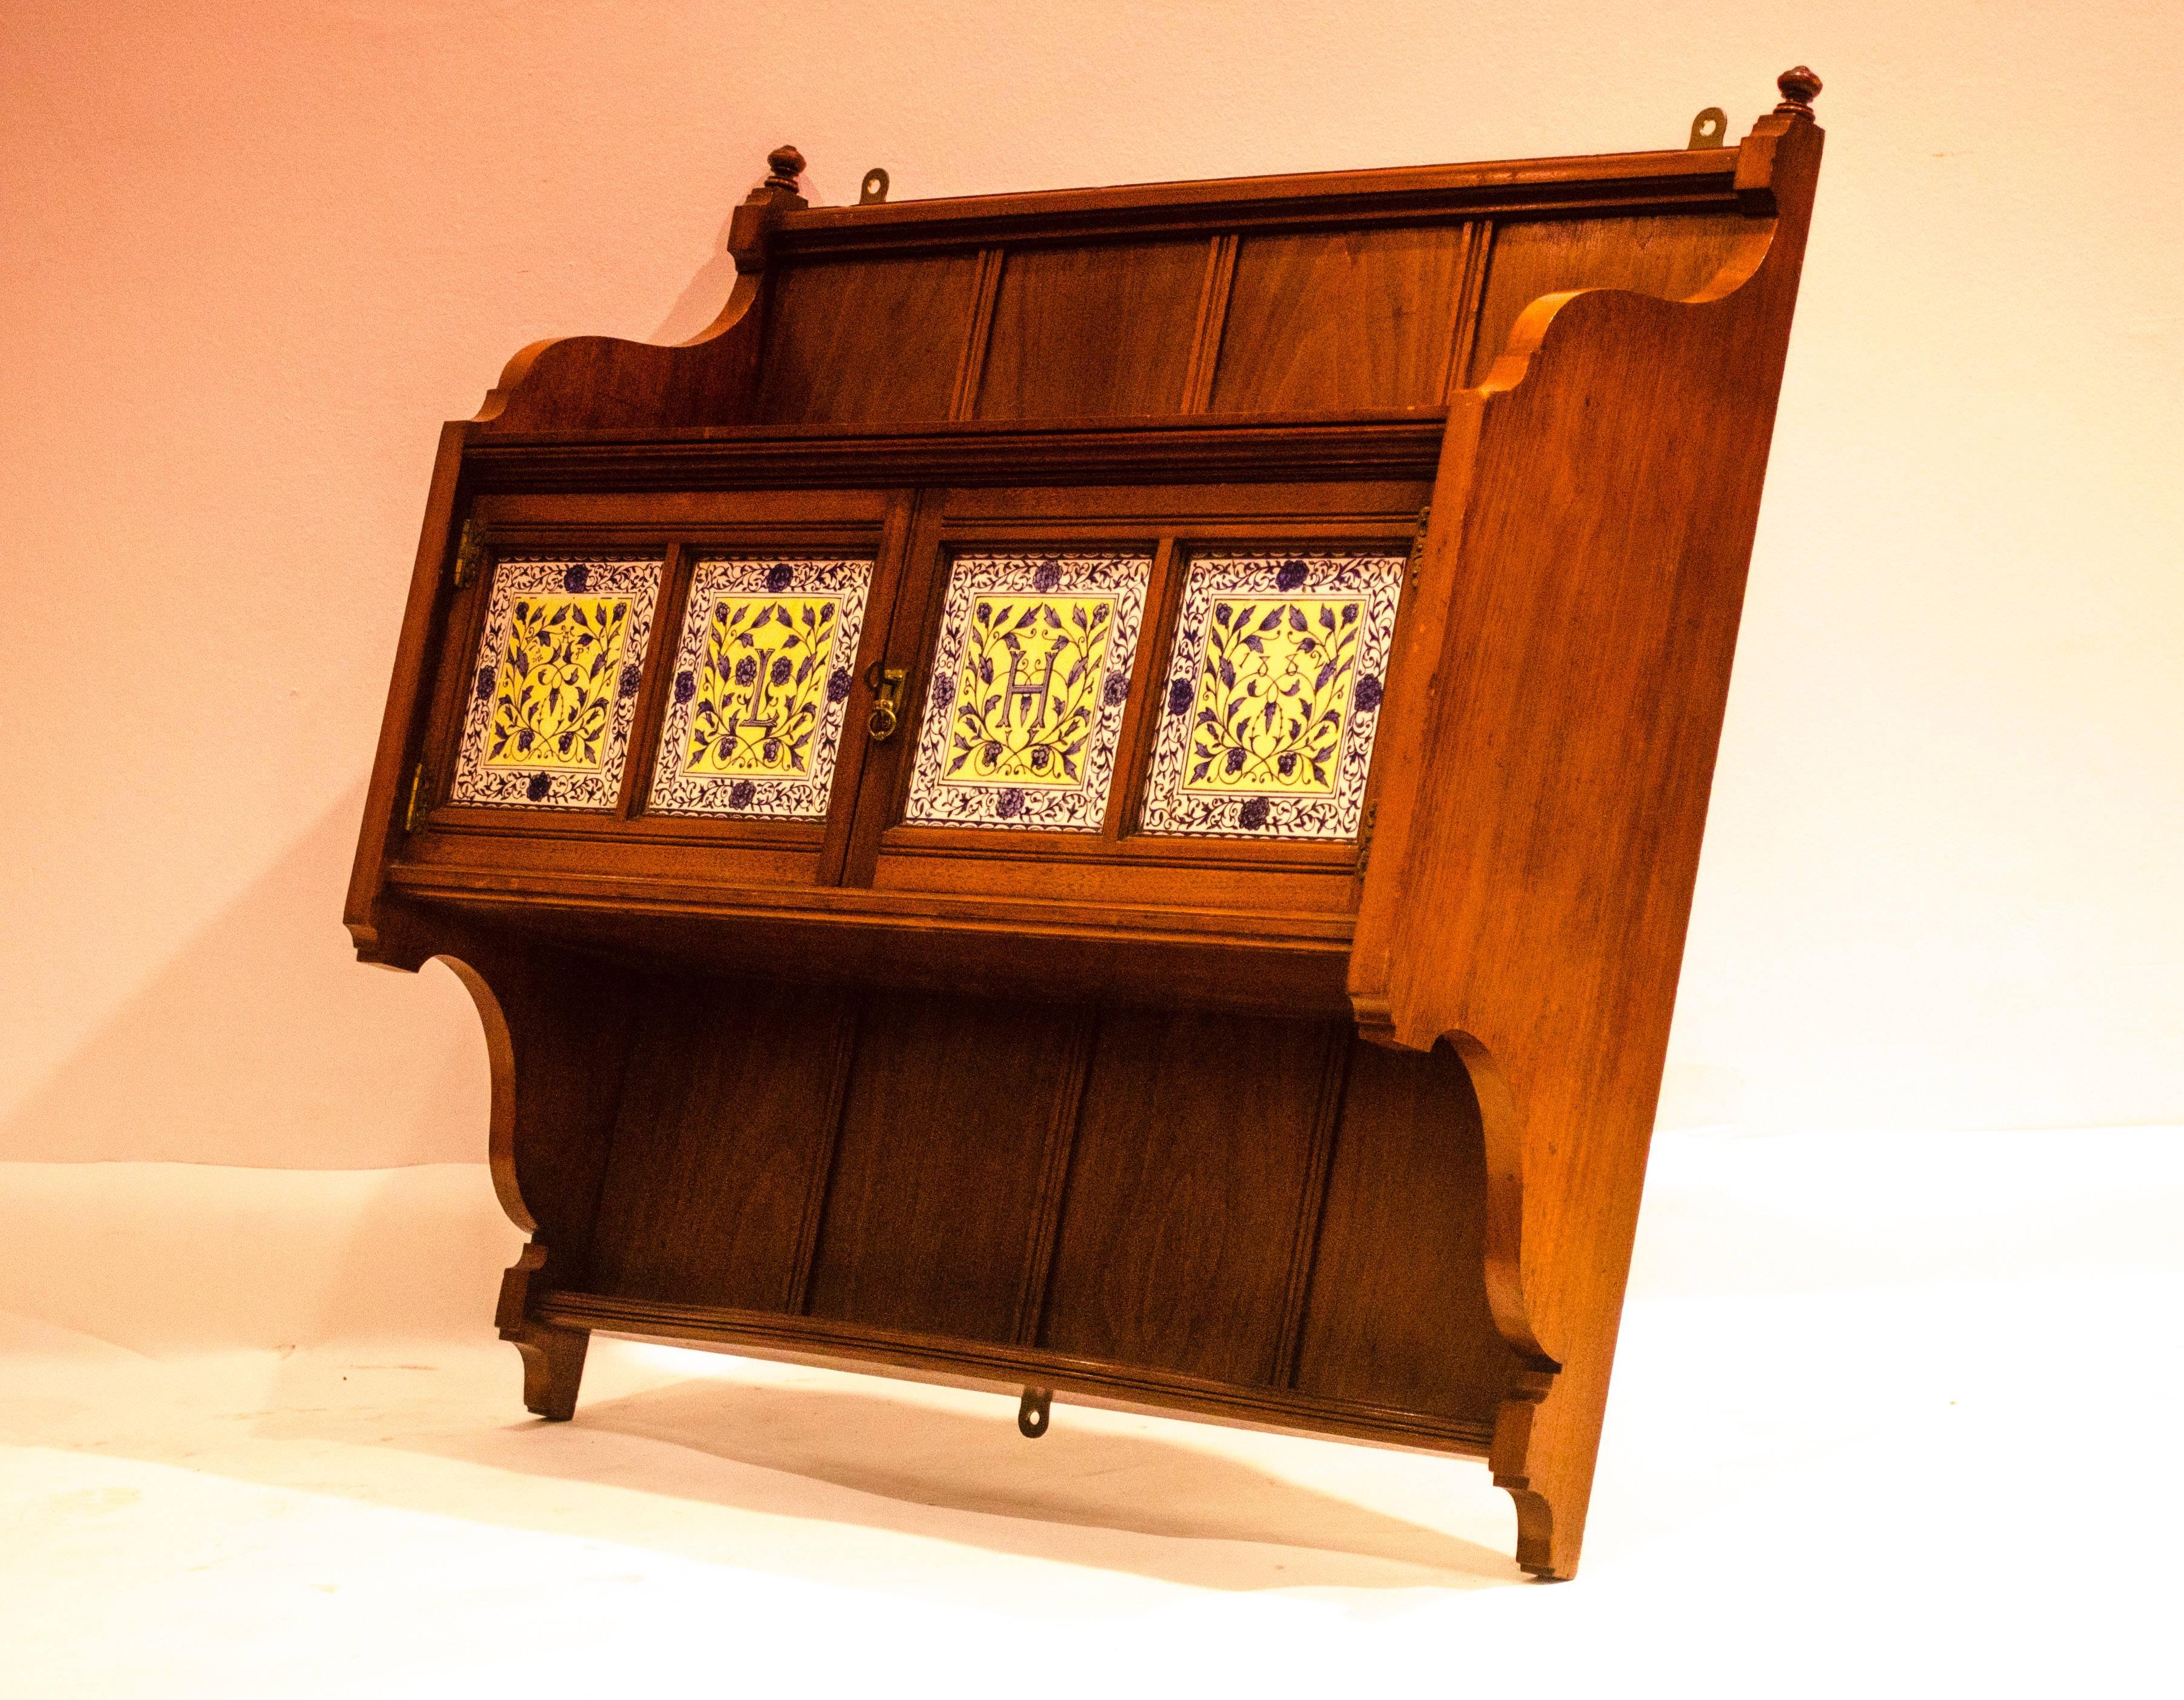 Lewis Foreman Day (attributed), a walnut and tiled wall cabinet, the tiles painted with flowers, 'L', 'H', '27th April' and '1882'. 'L', 'H' could easily be swapped to 'H', 'L'.